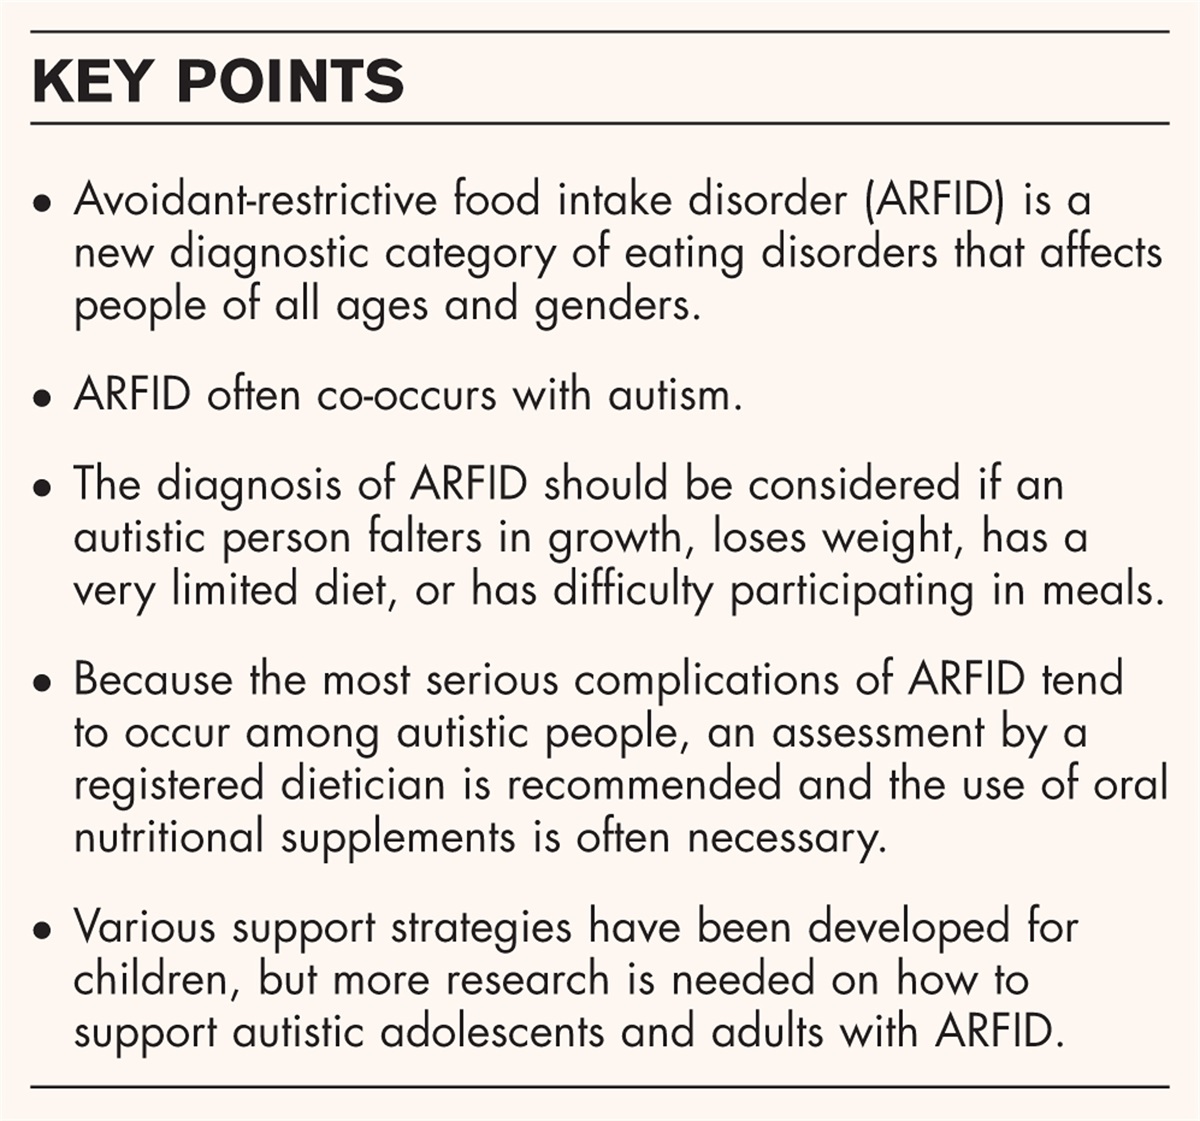 Avoidant-restrictive food intake disorder and autism: epidemiology, etiology, complications, treatment, and outcome